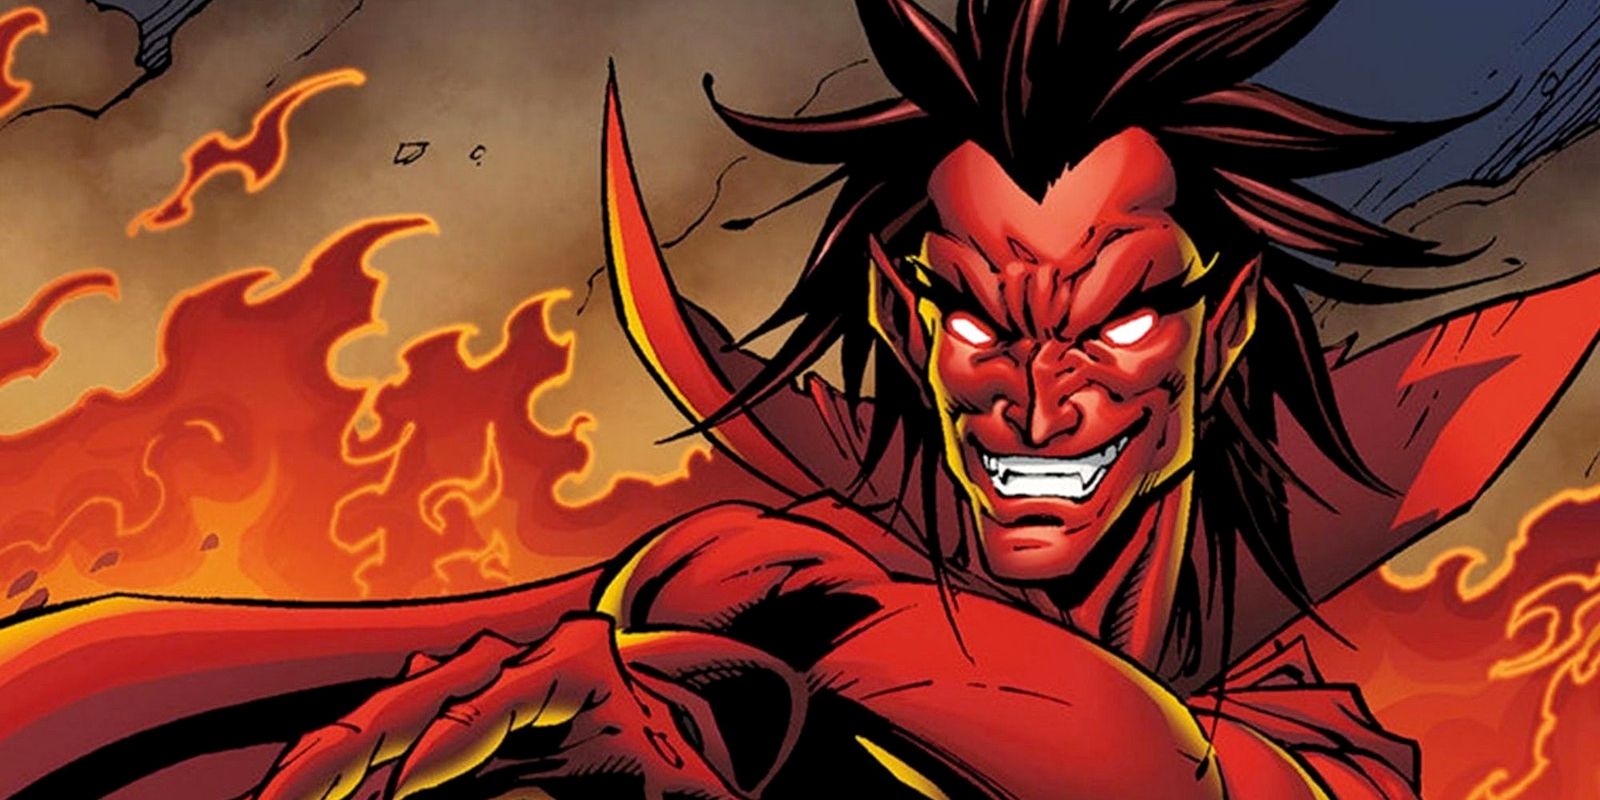 Mephisto stands in front of flames, smiling, in Marvel Comics.